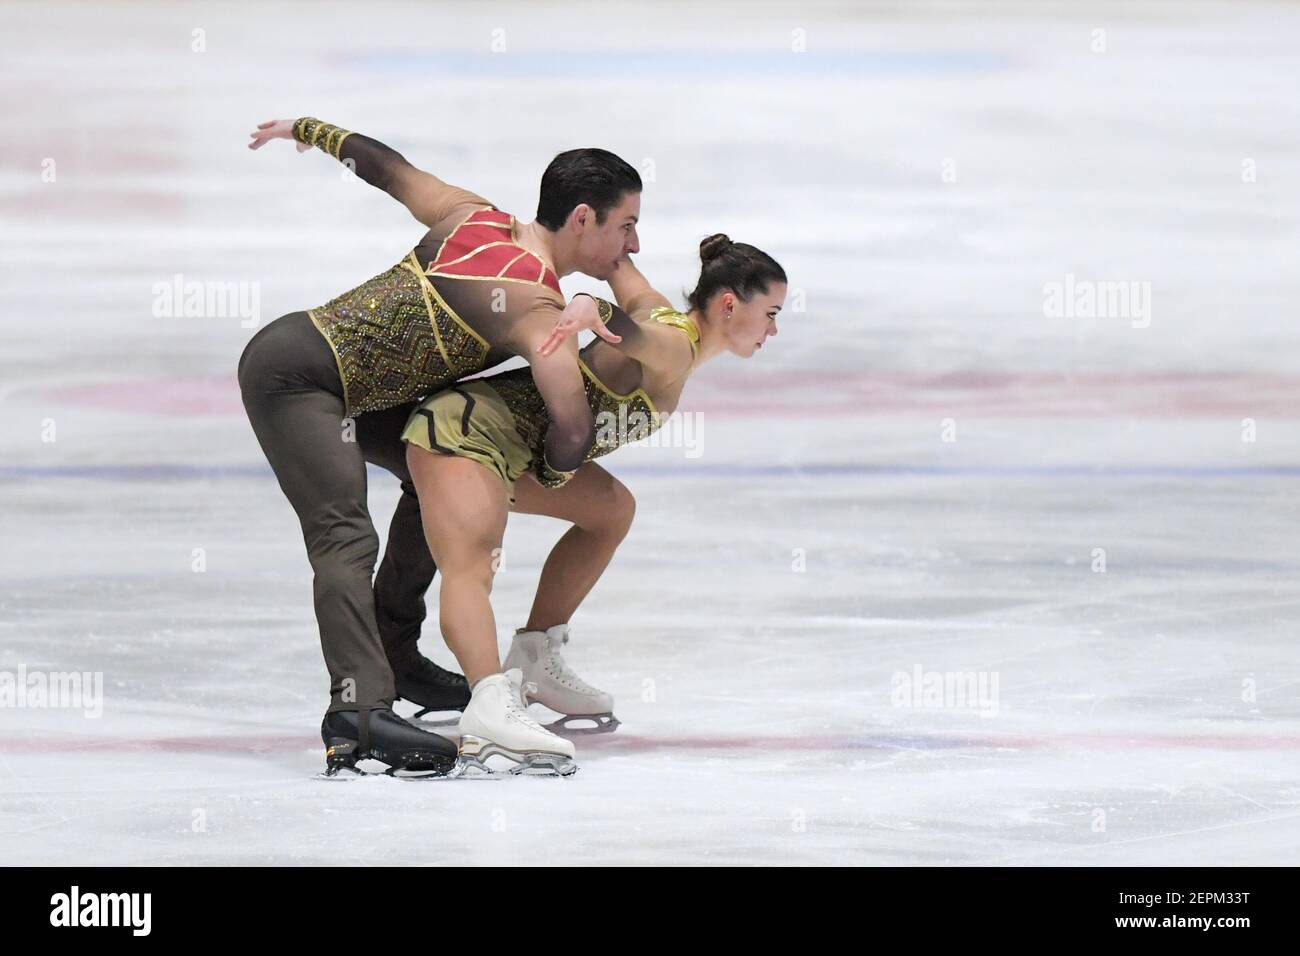 THE HAGUE, NETHERLANDS - FEBRUARY 27: Dorota Broda and Pedro Betegon of Spain competes in the figure skating men's singles short program on Day 3 duri Stock Photo